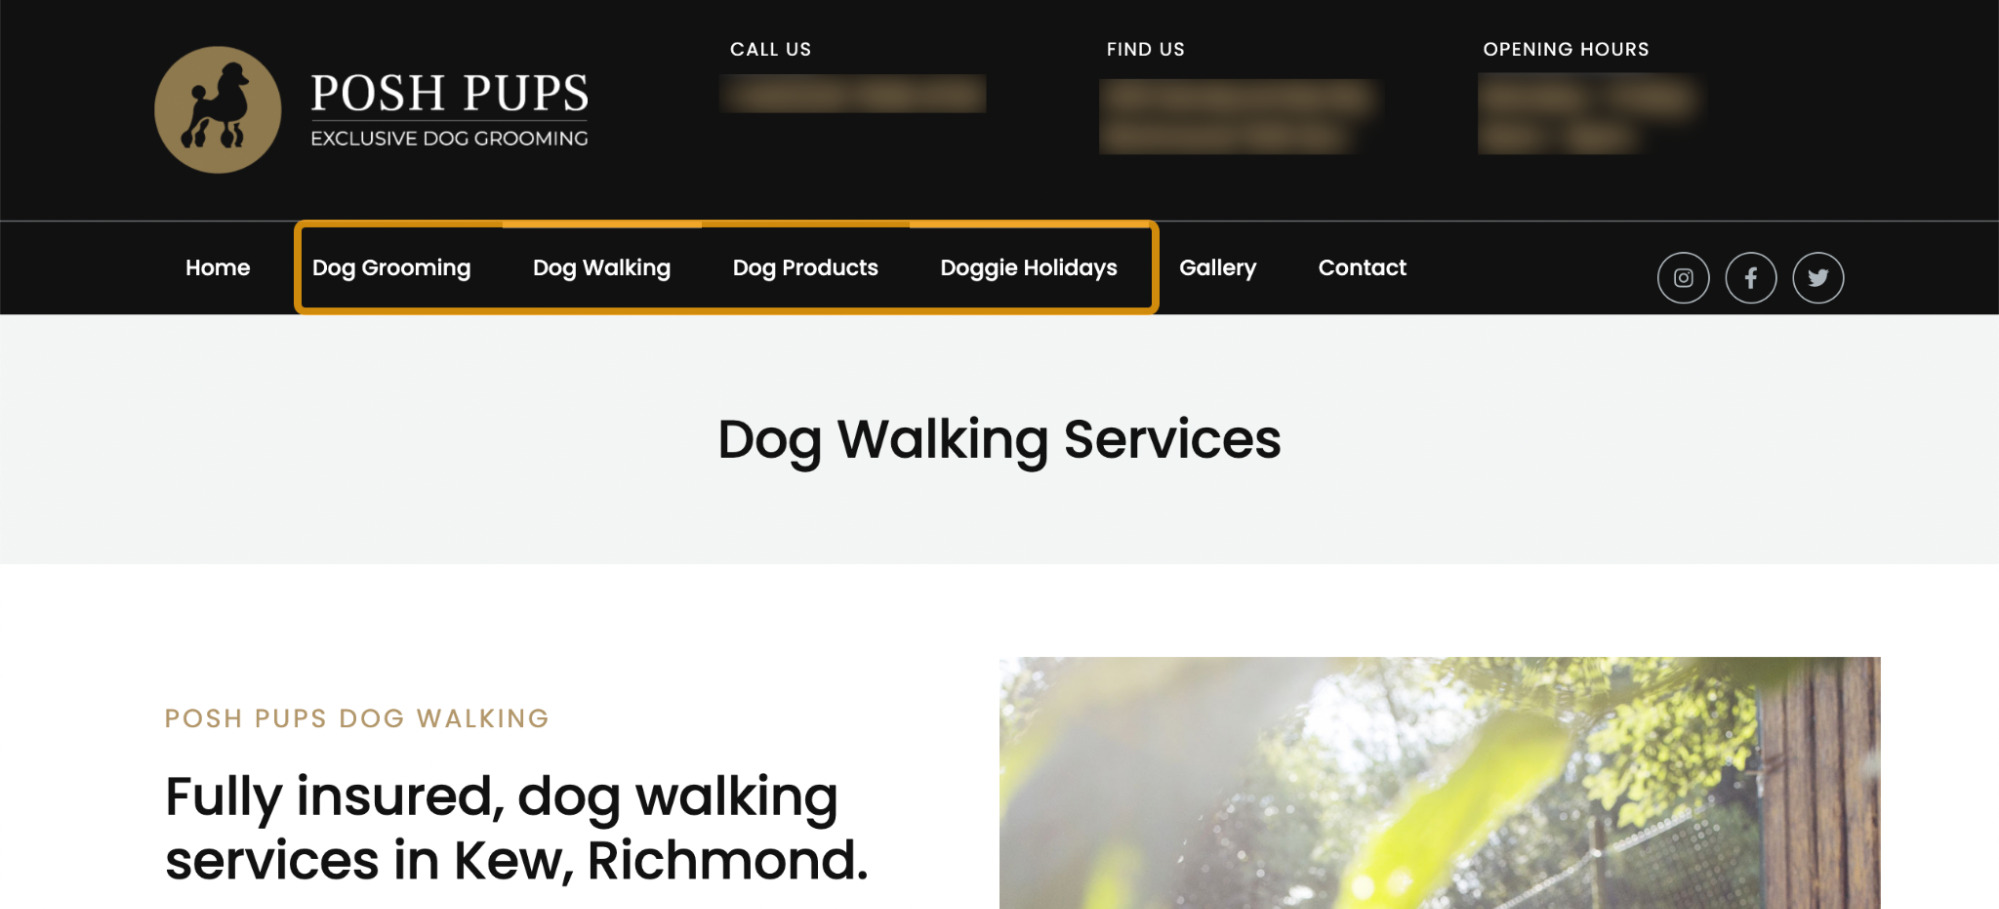 Example of services and ،ucts featured in the navigation, via Posh Pups Kew